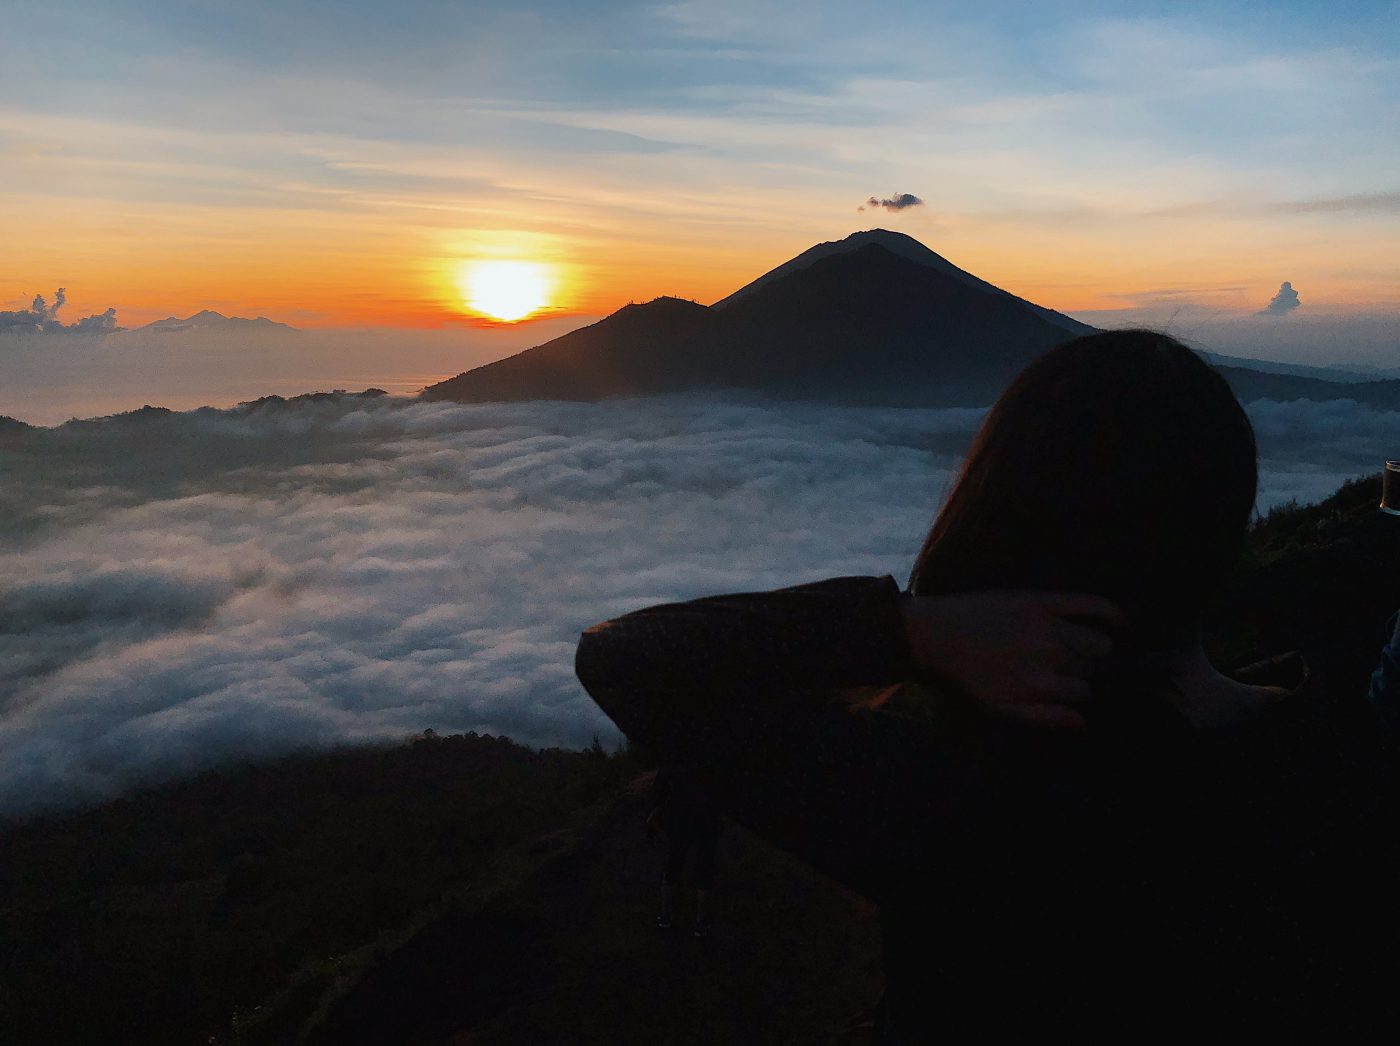 Waiting for the sunrise at Mount Batur in Bali